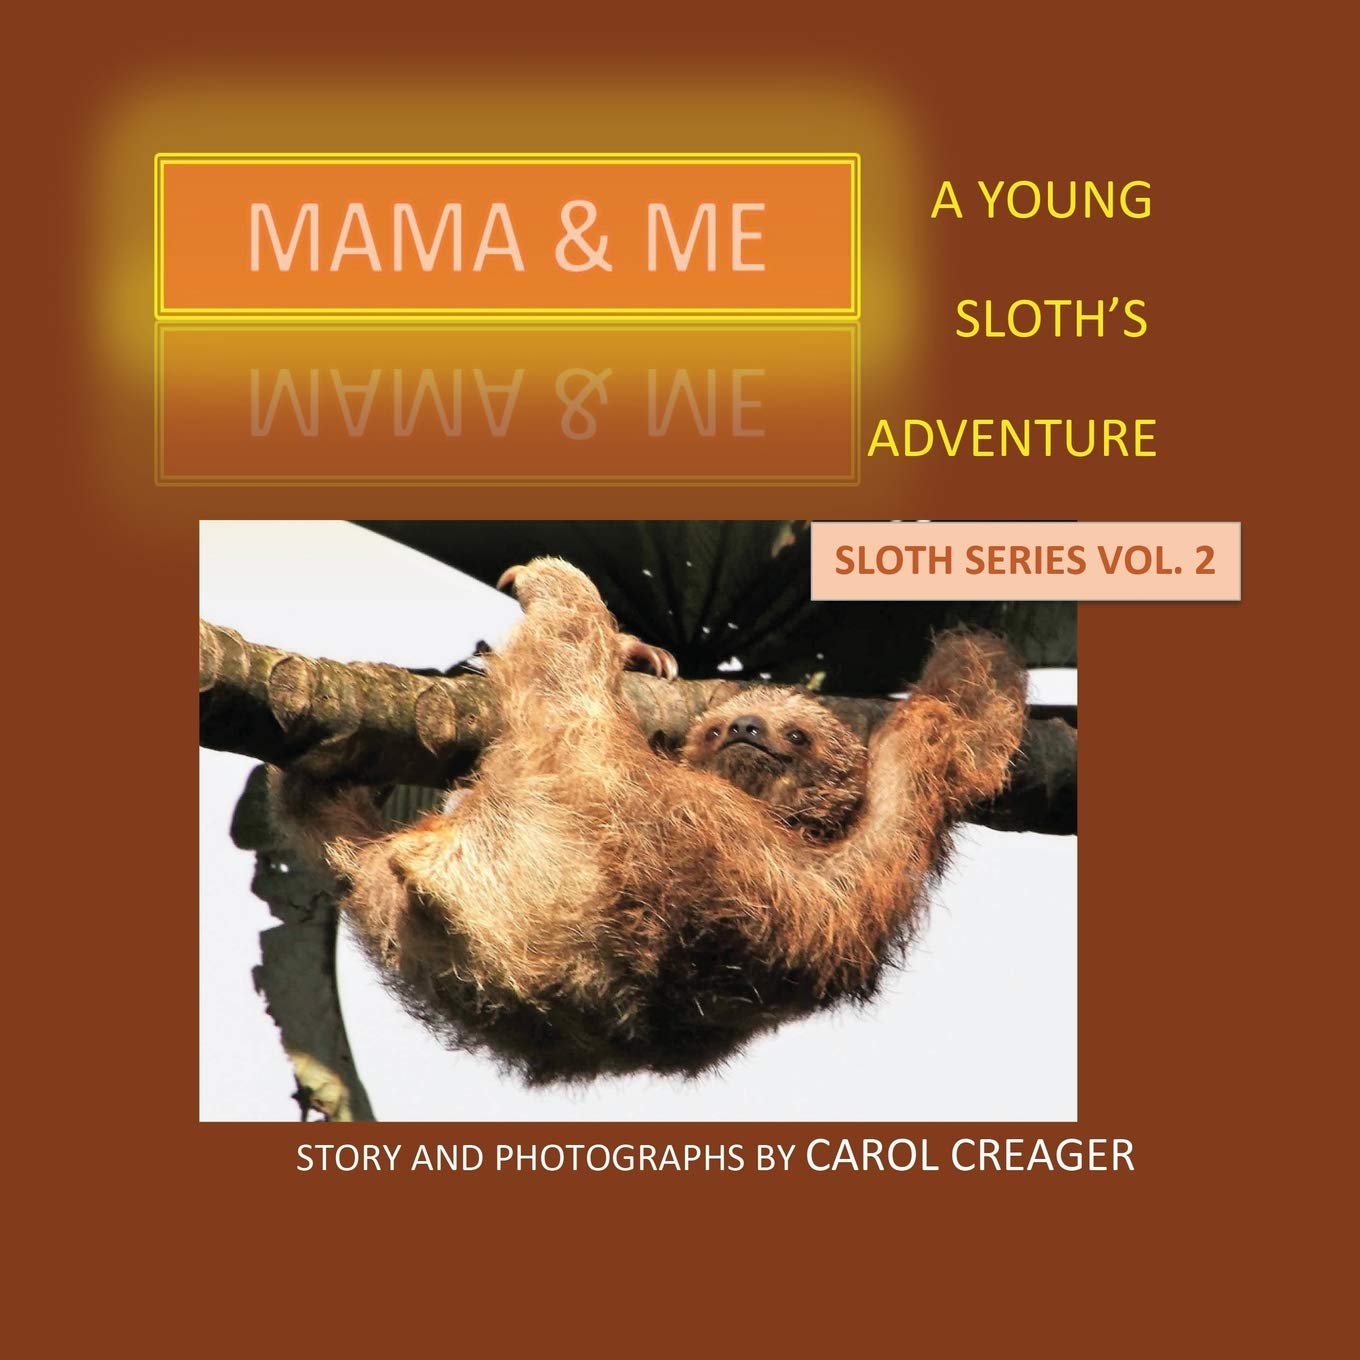  Amazon.com Mama and Me: A Young Sloth's Adventure